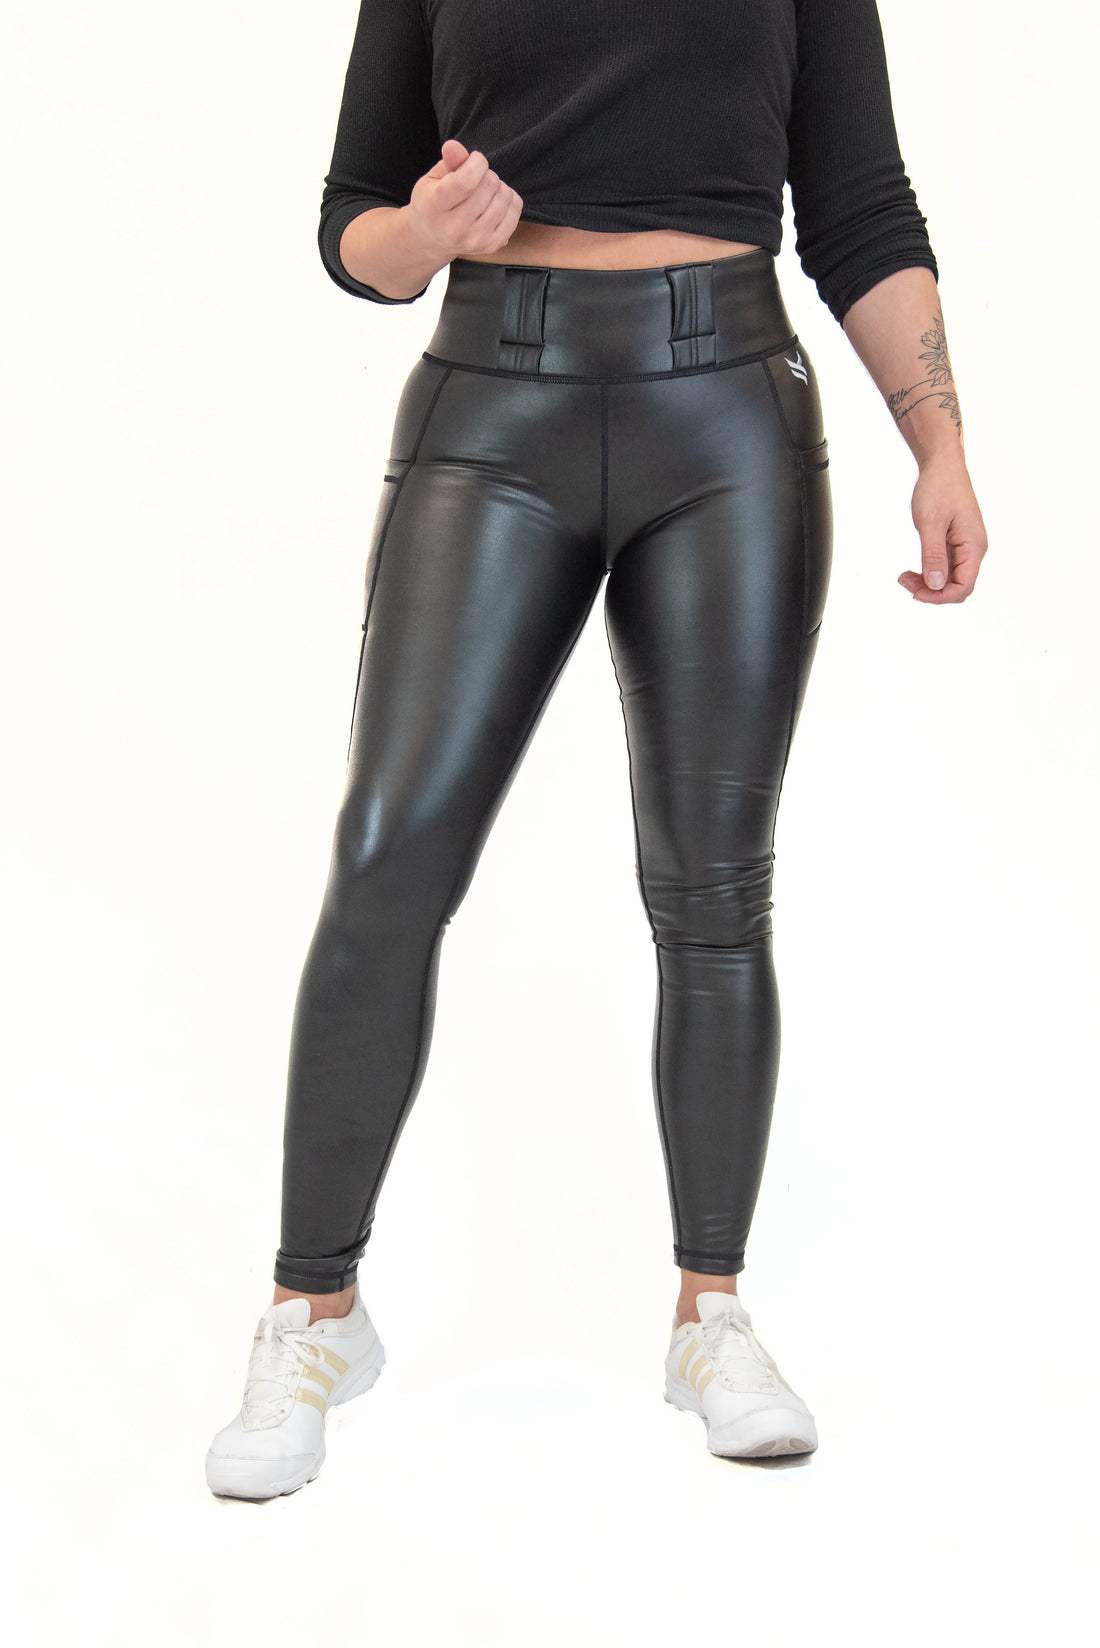 matty m Black FAUX LEATHER Front High Waisted LEGGINGS Pants